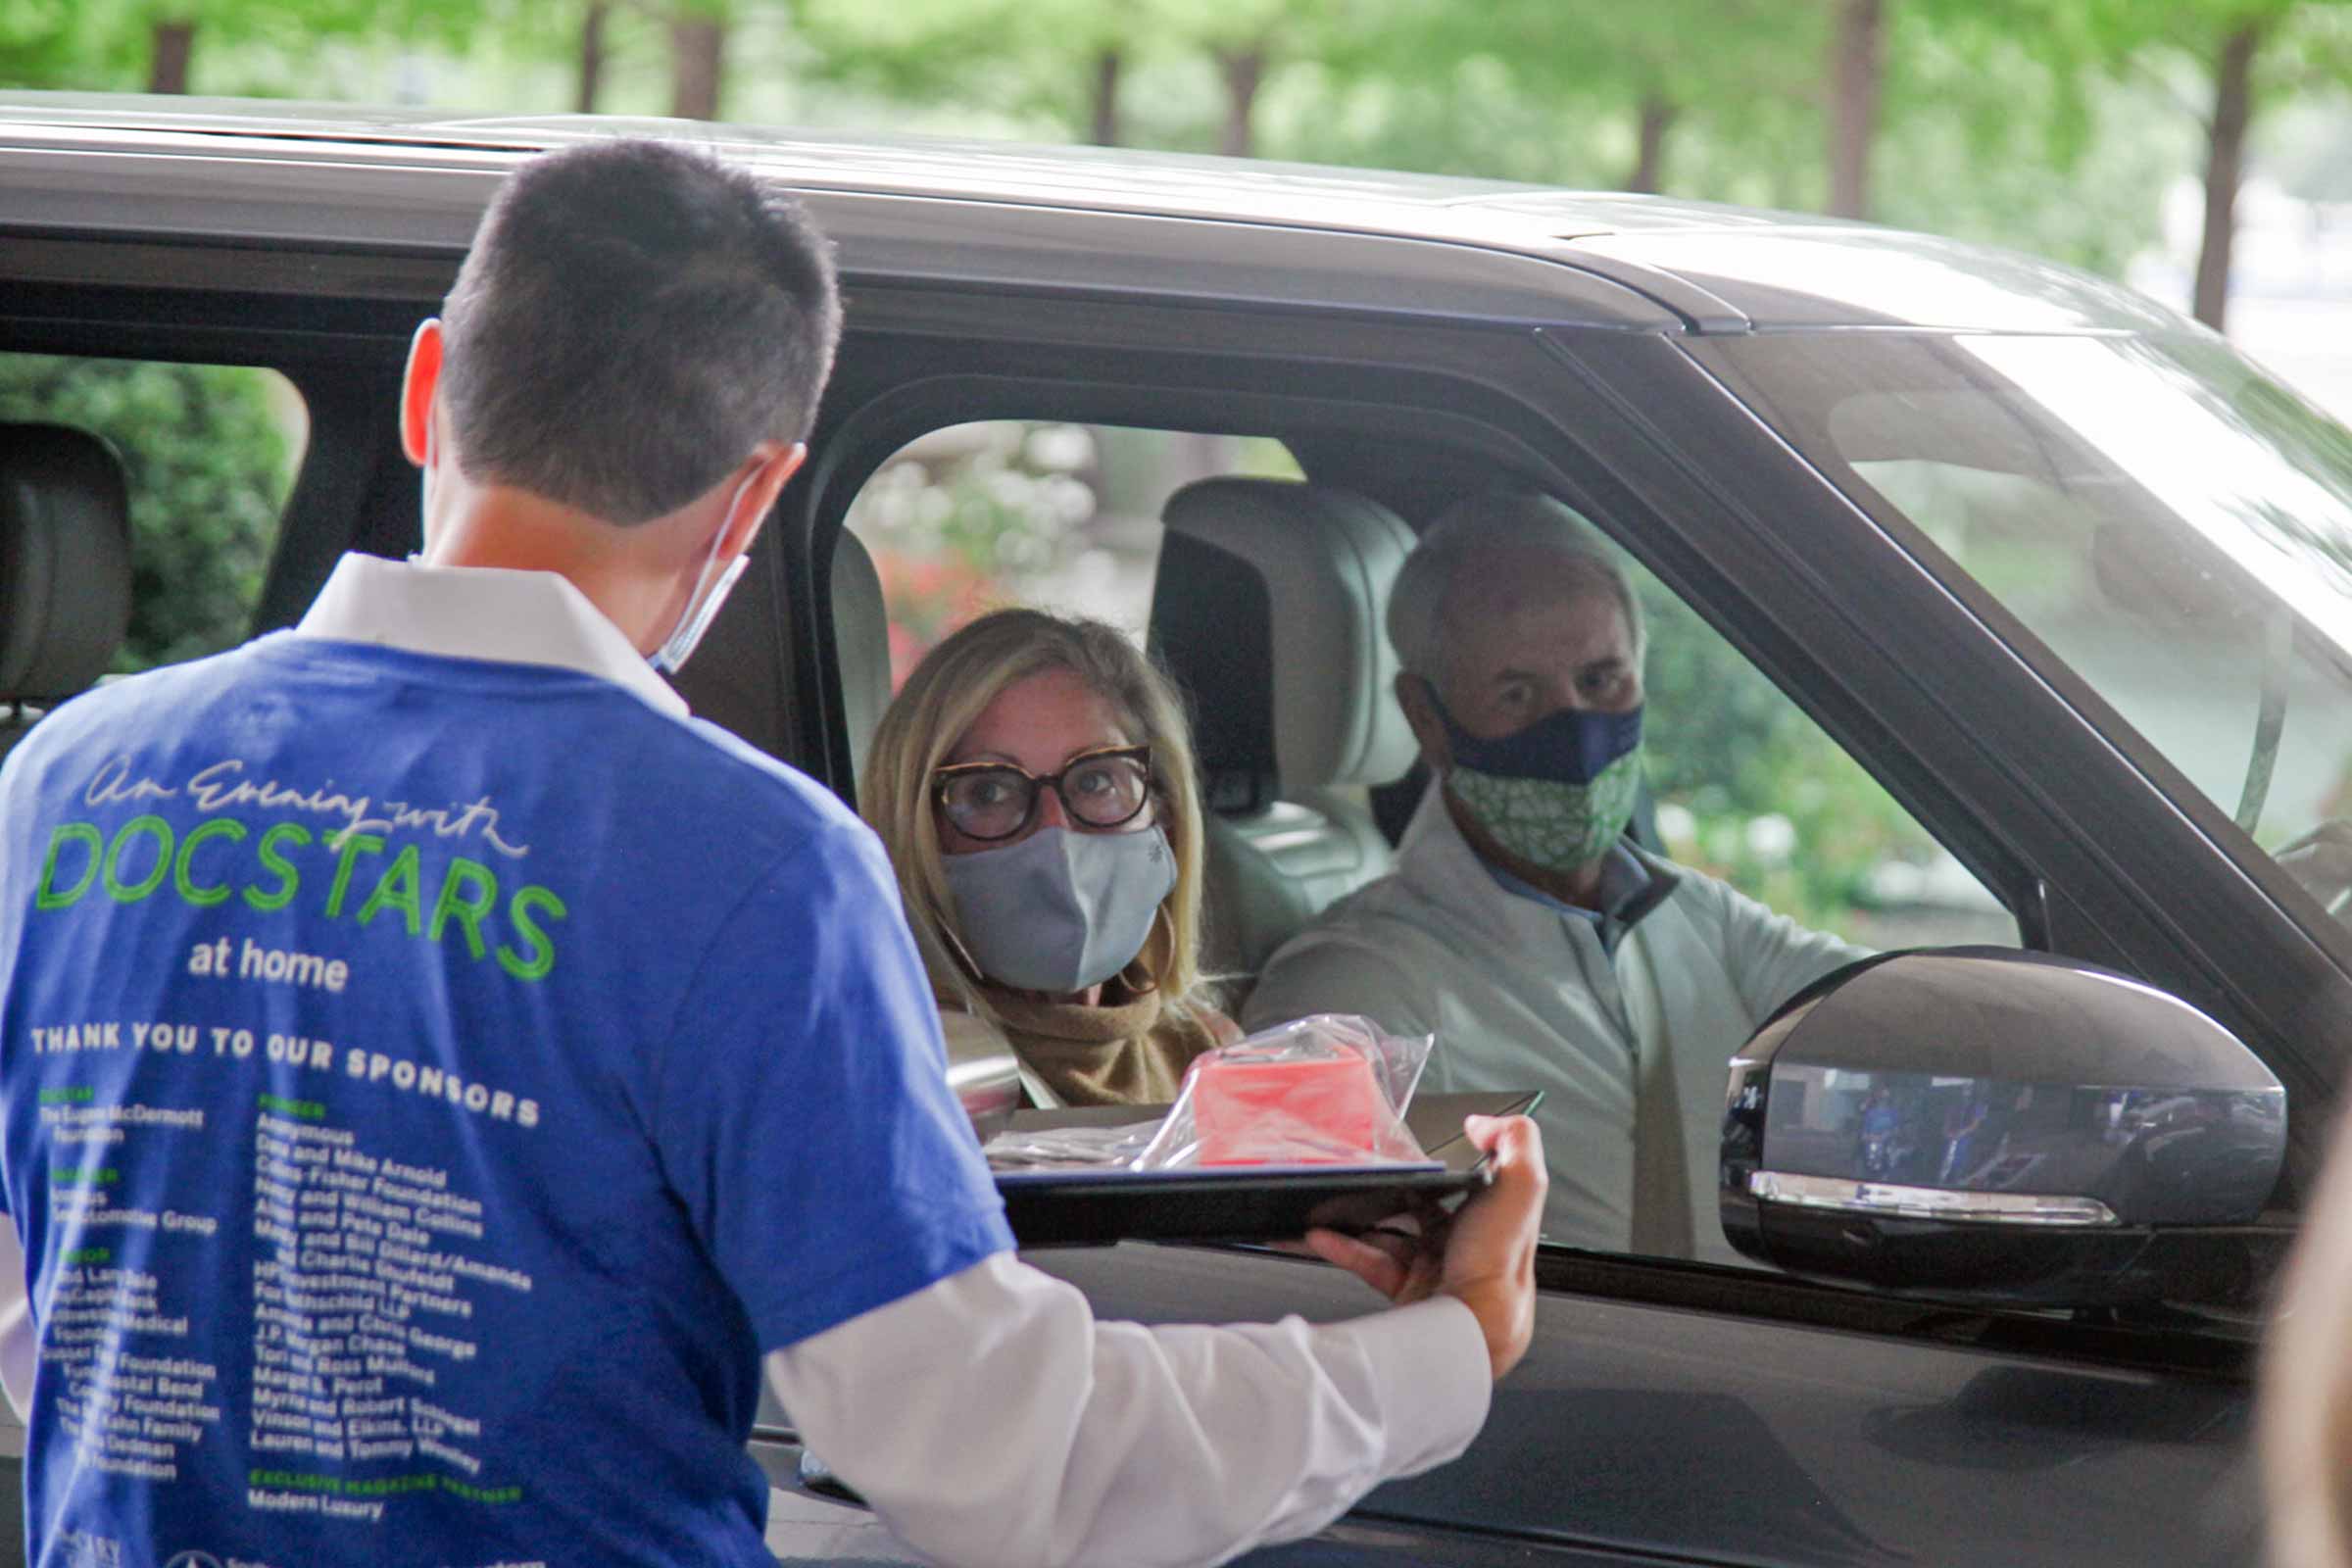 An event volunter carries science experiments on a tray to event guests waiting in their vehicle.